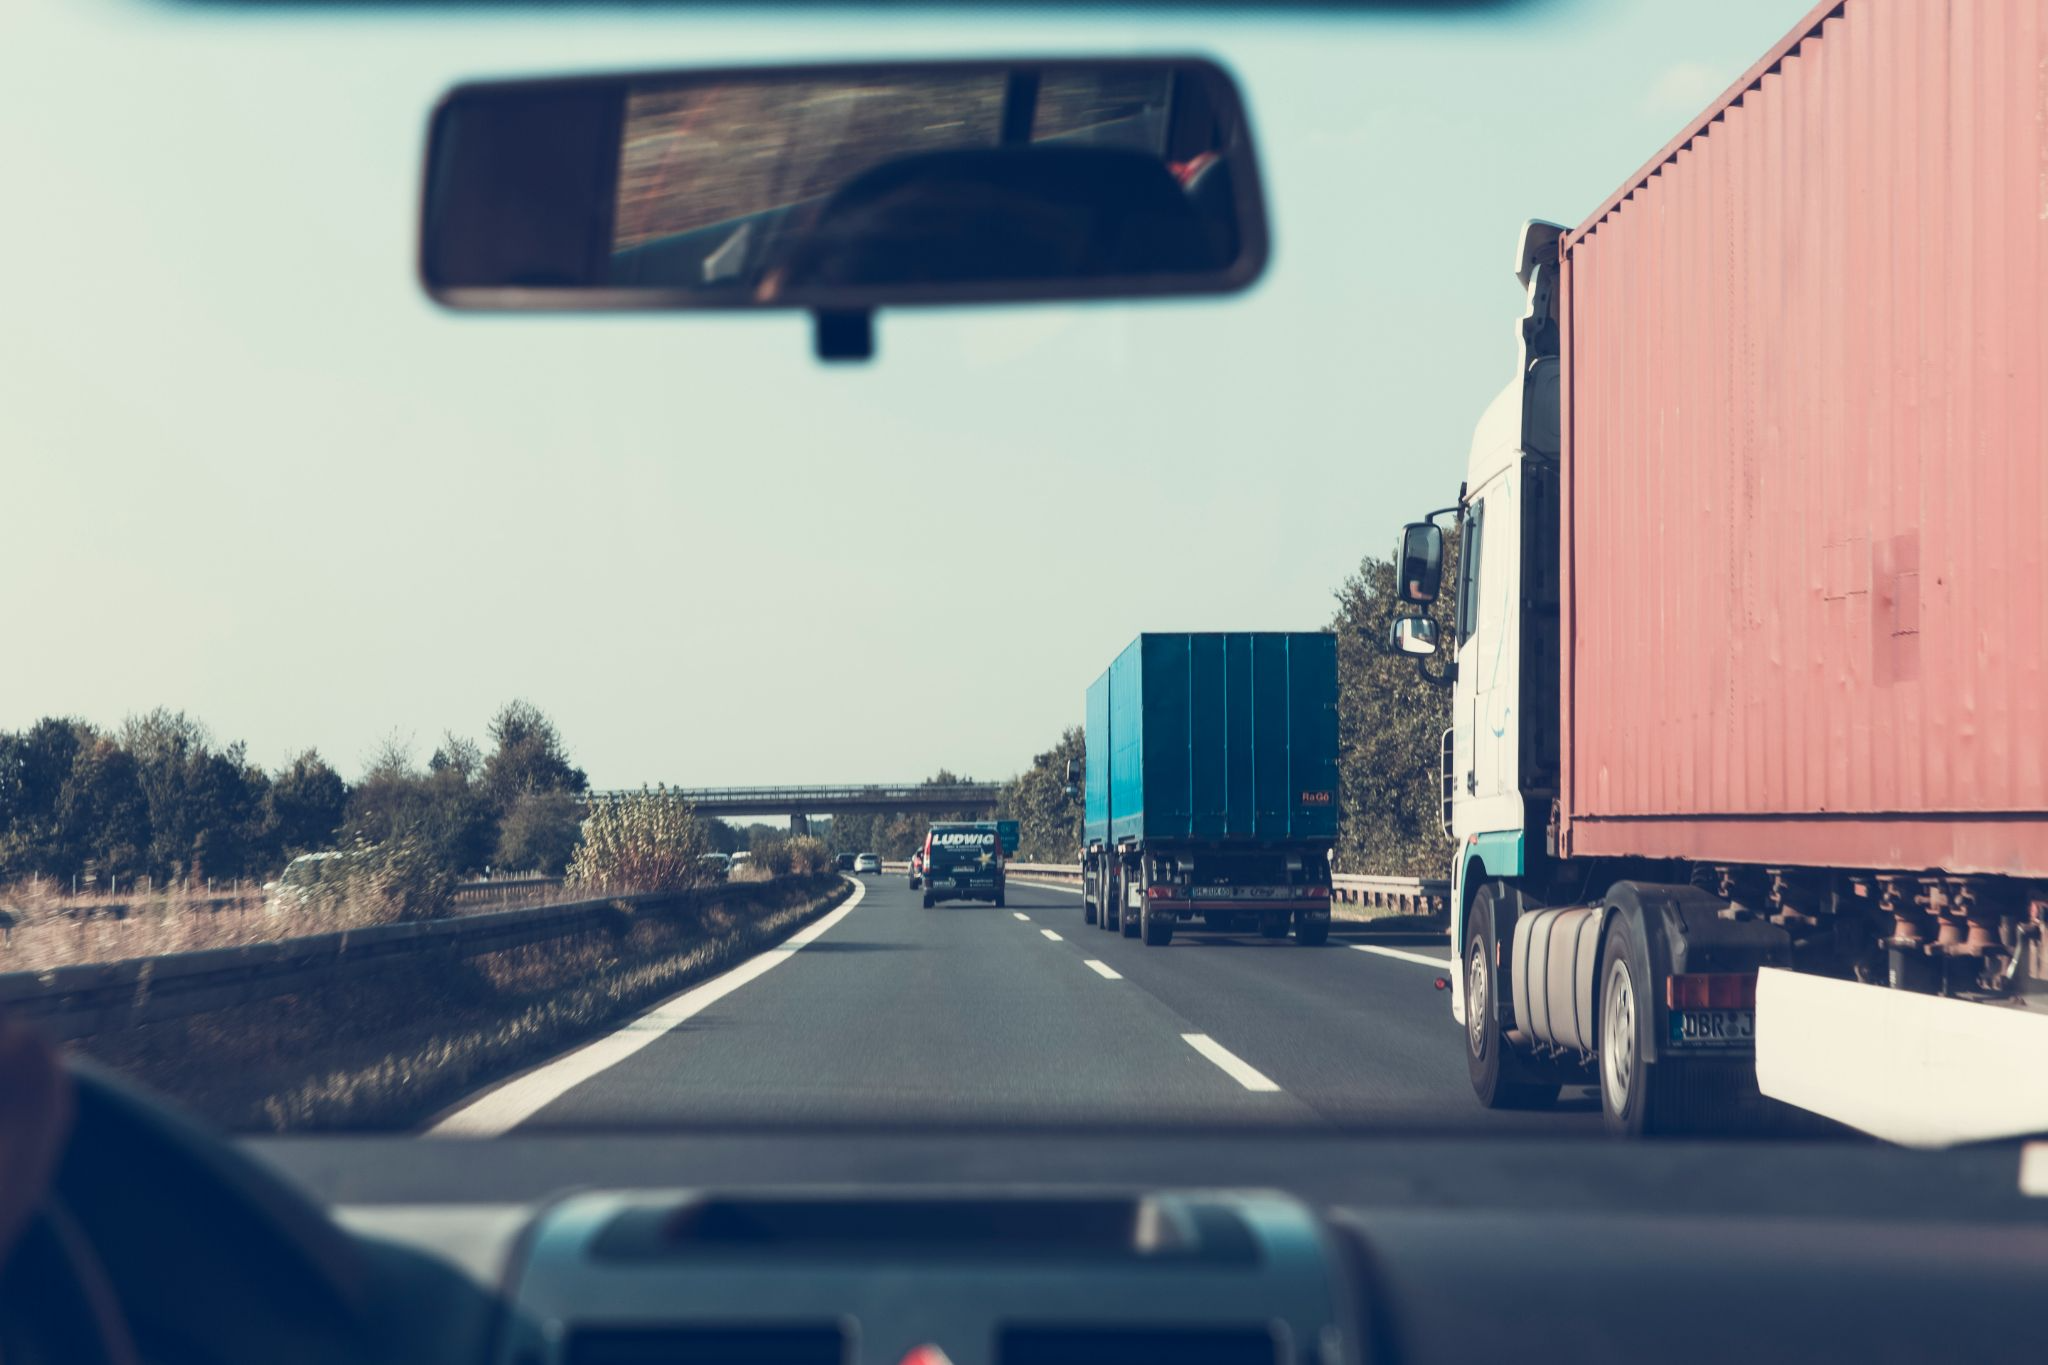 View of two trucks in the right lane from a car driver's perspective